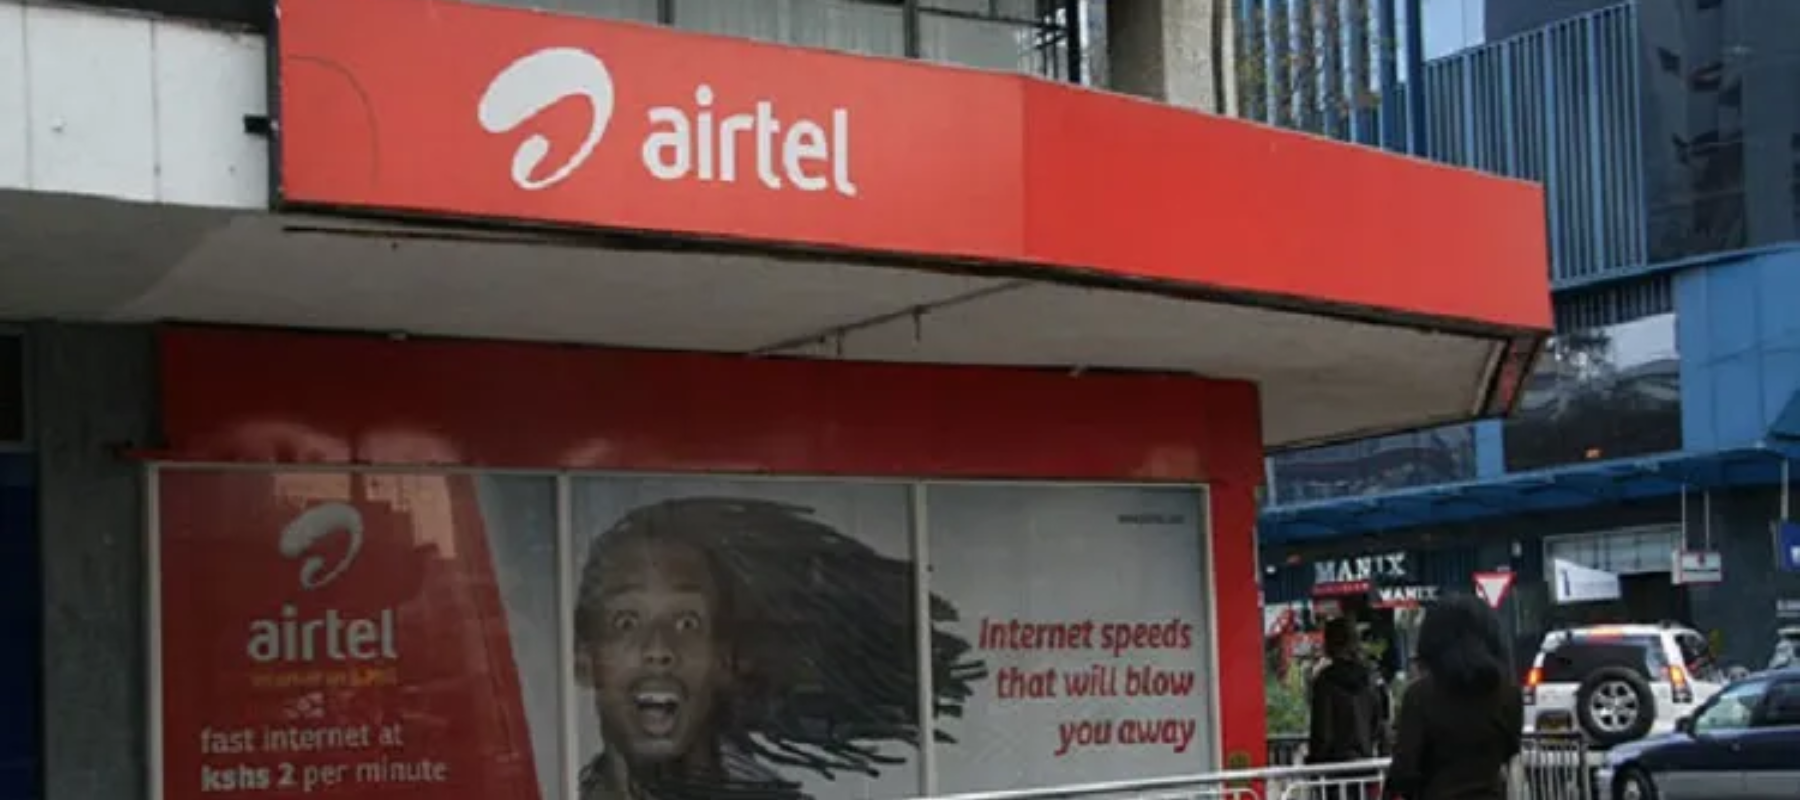 Airtel Africa launches ads platform for advertisers and agencies